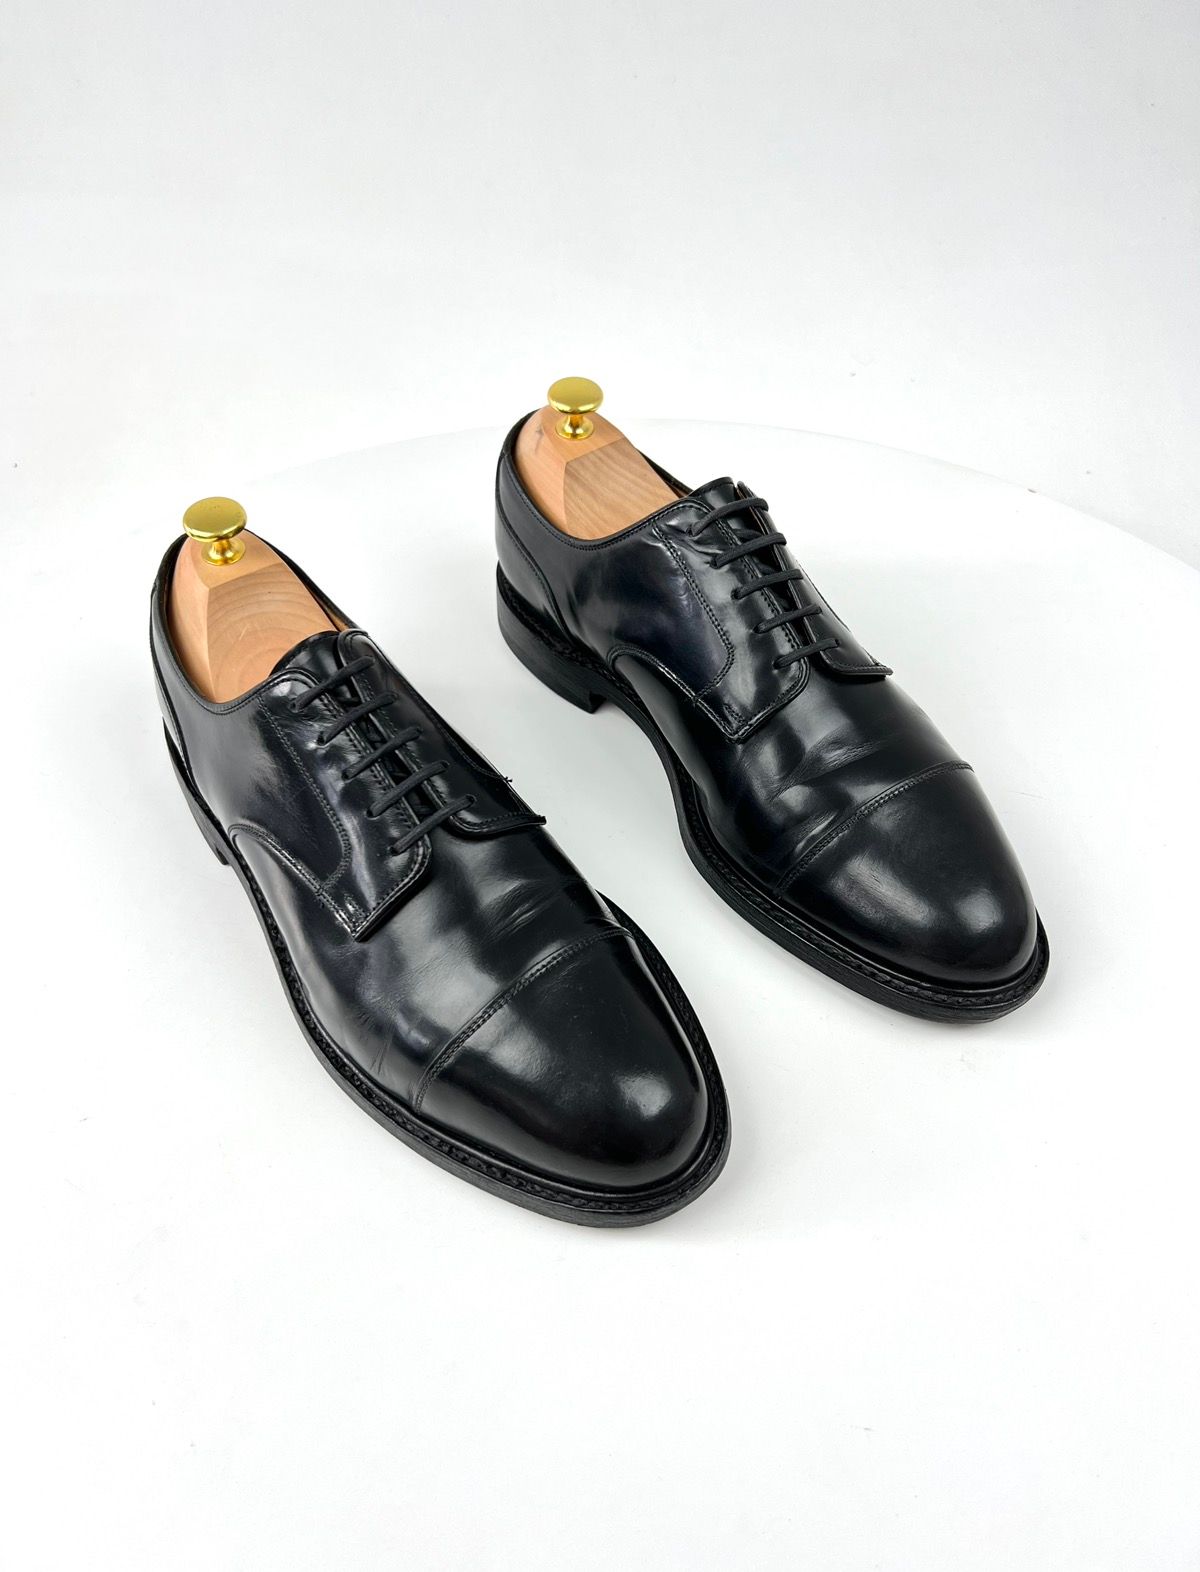 Loake Loake Lace Up Leather Derby Shoes Handmade in England | Grailed